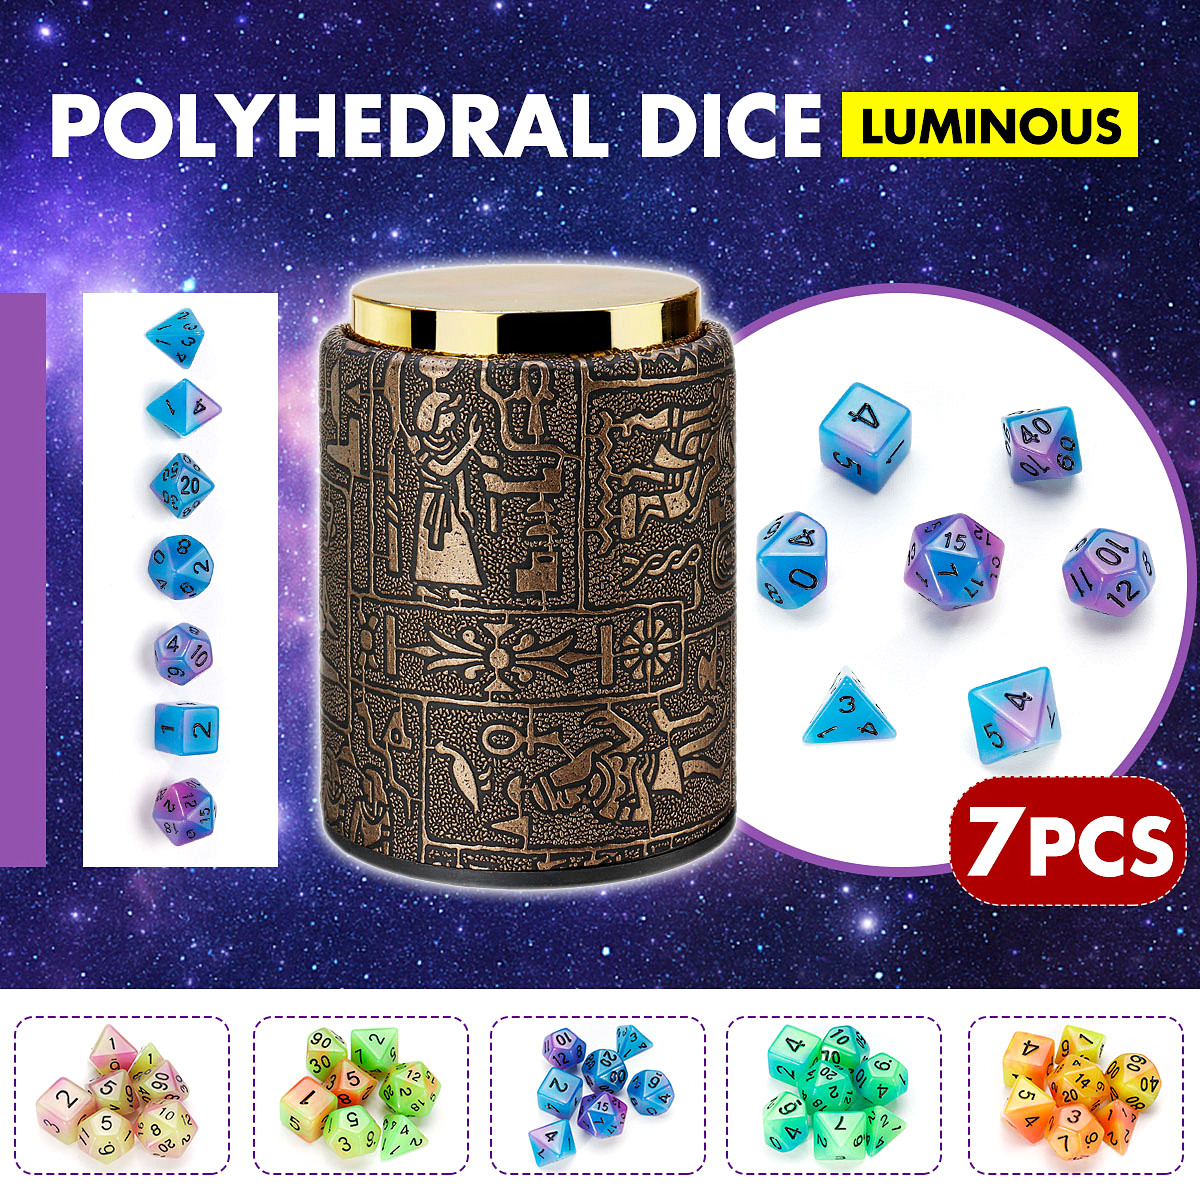 7-Pcs-Luminous-Polyhedral-Dices-Multisided-Dices-Dice-Set-With-Dice-Cup-For-RPG-1421428-1